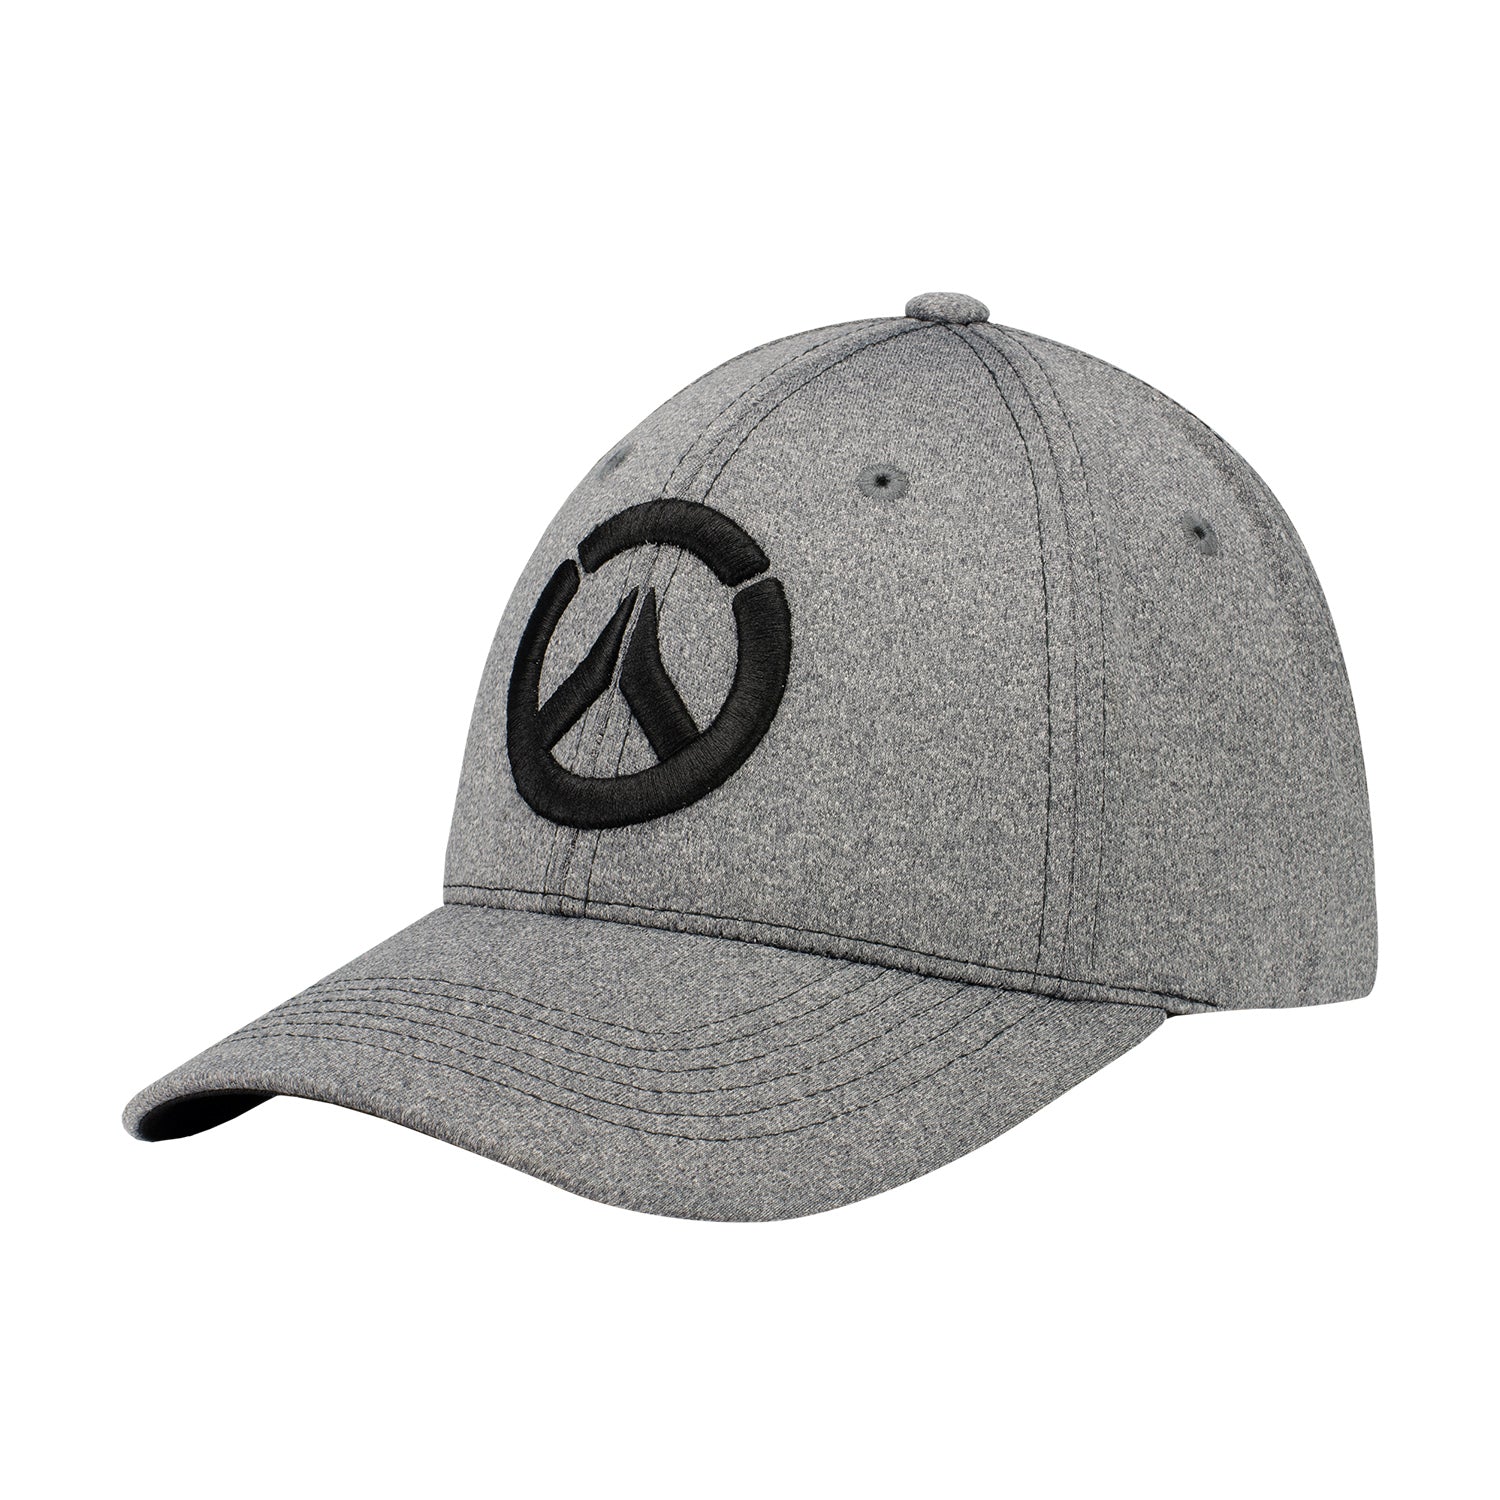 Overwatch Grey Performance Hat - Left Front Side View